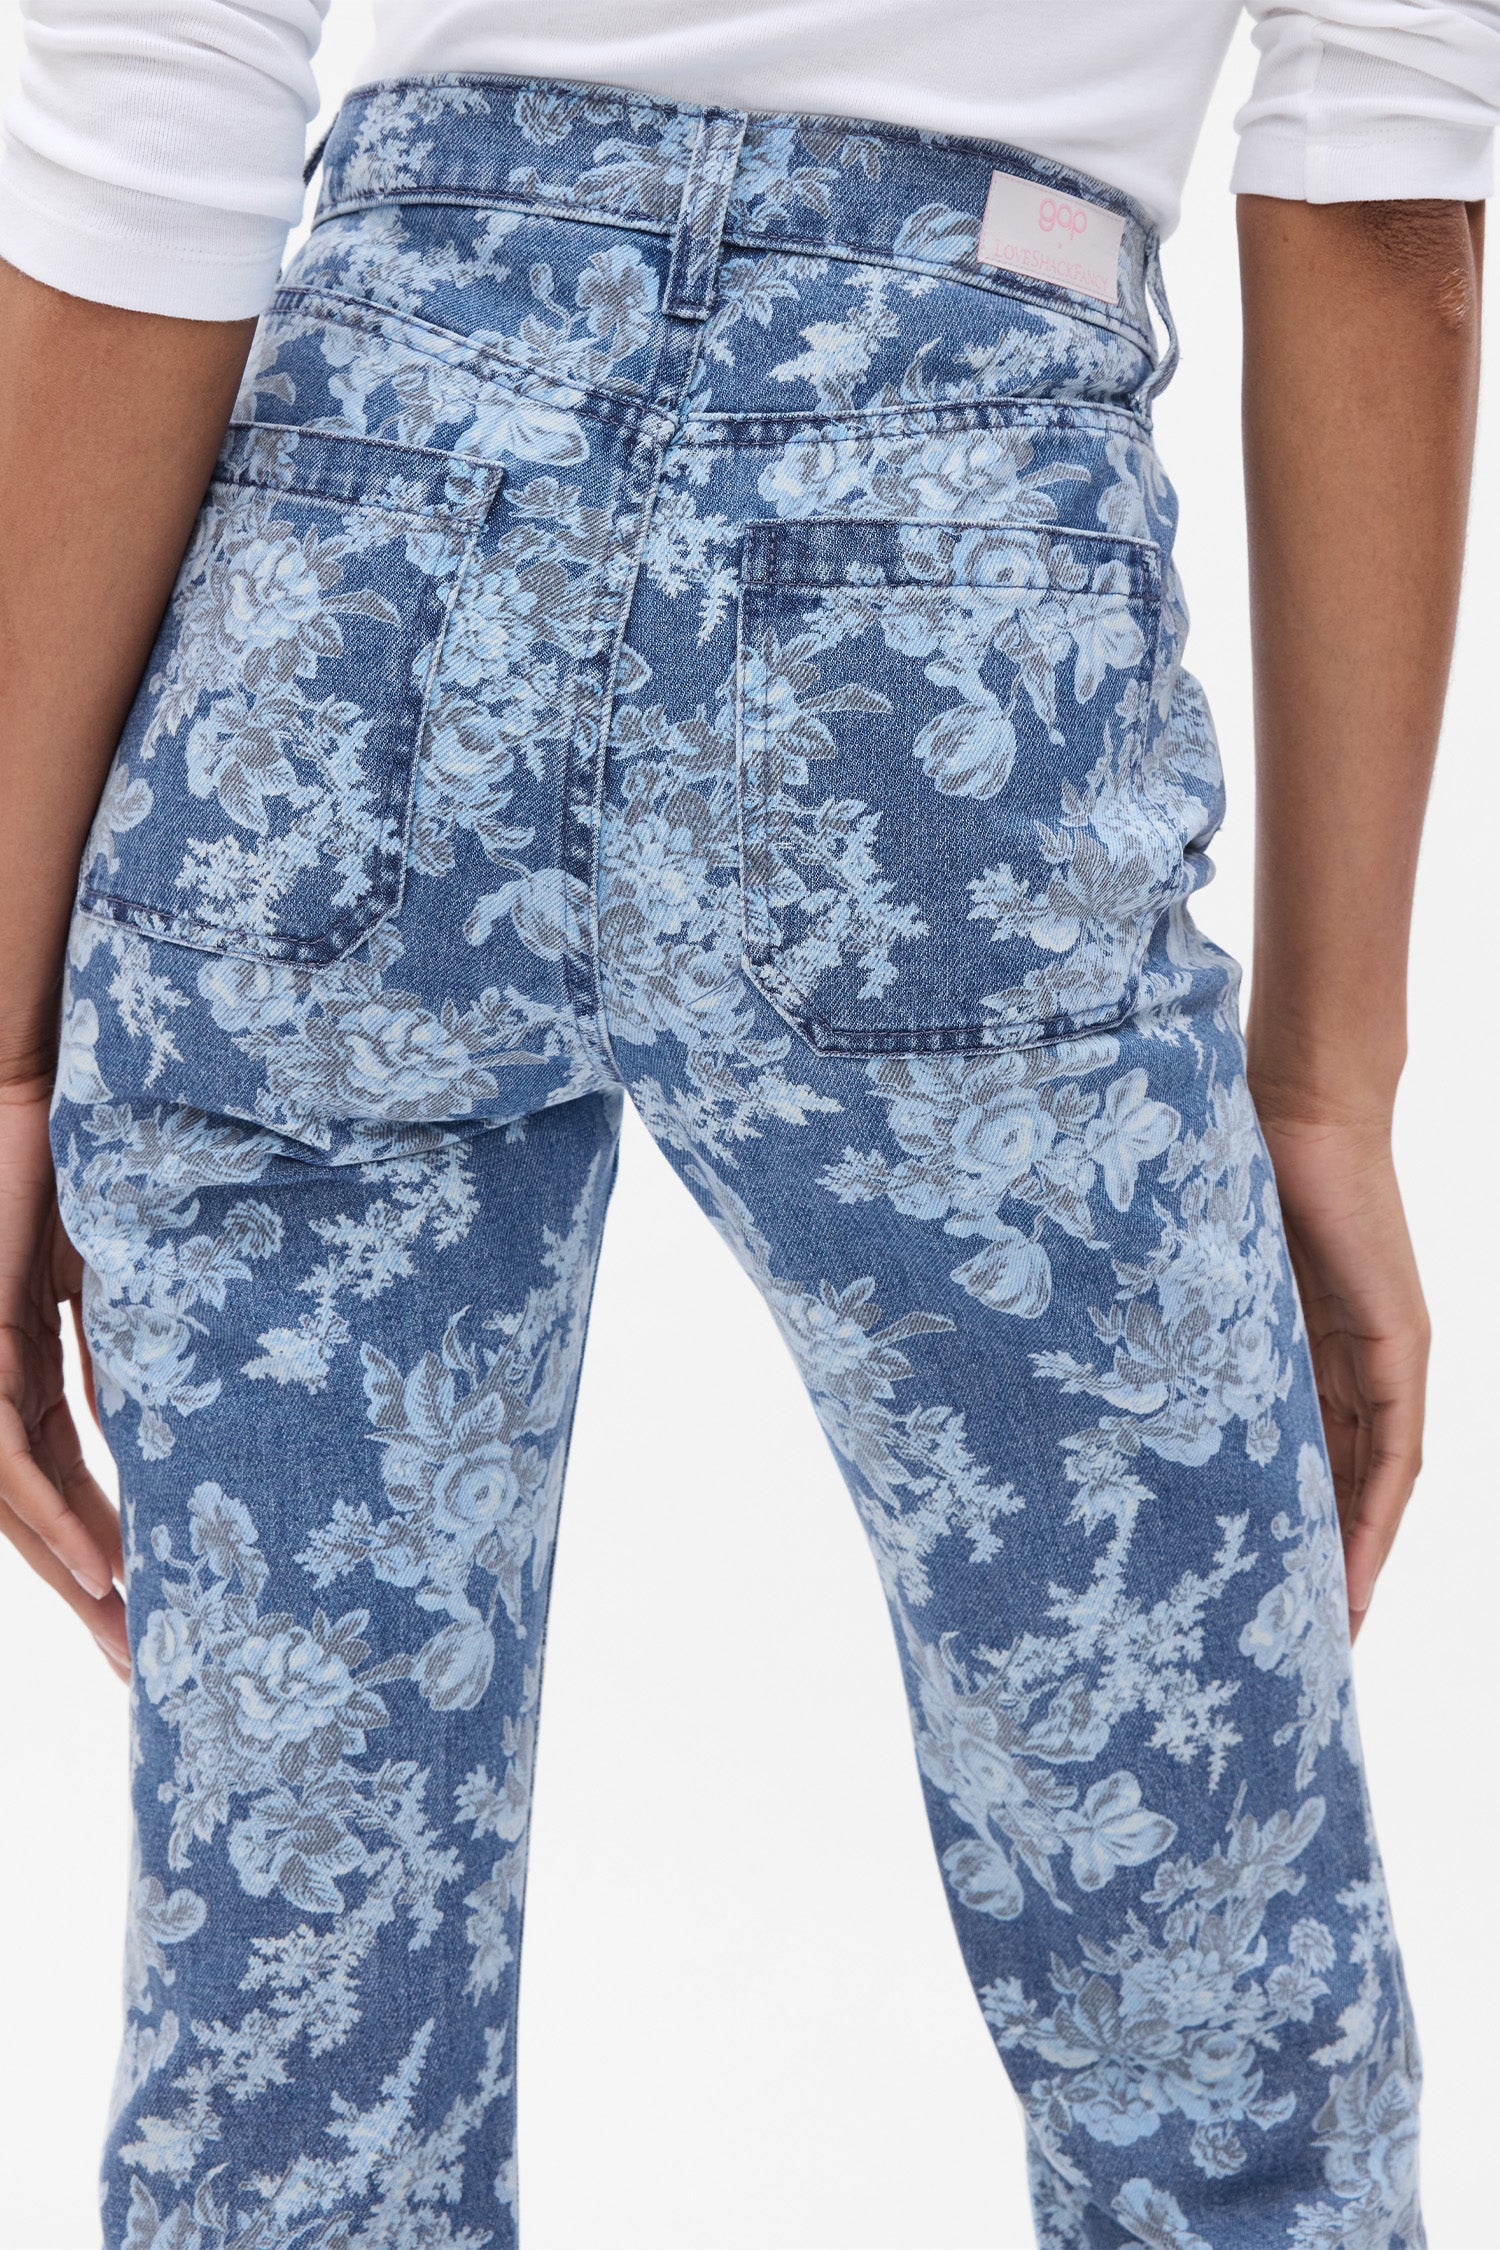 Back image of model wearing blue floral high rise flare jeans with pockets at the back.